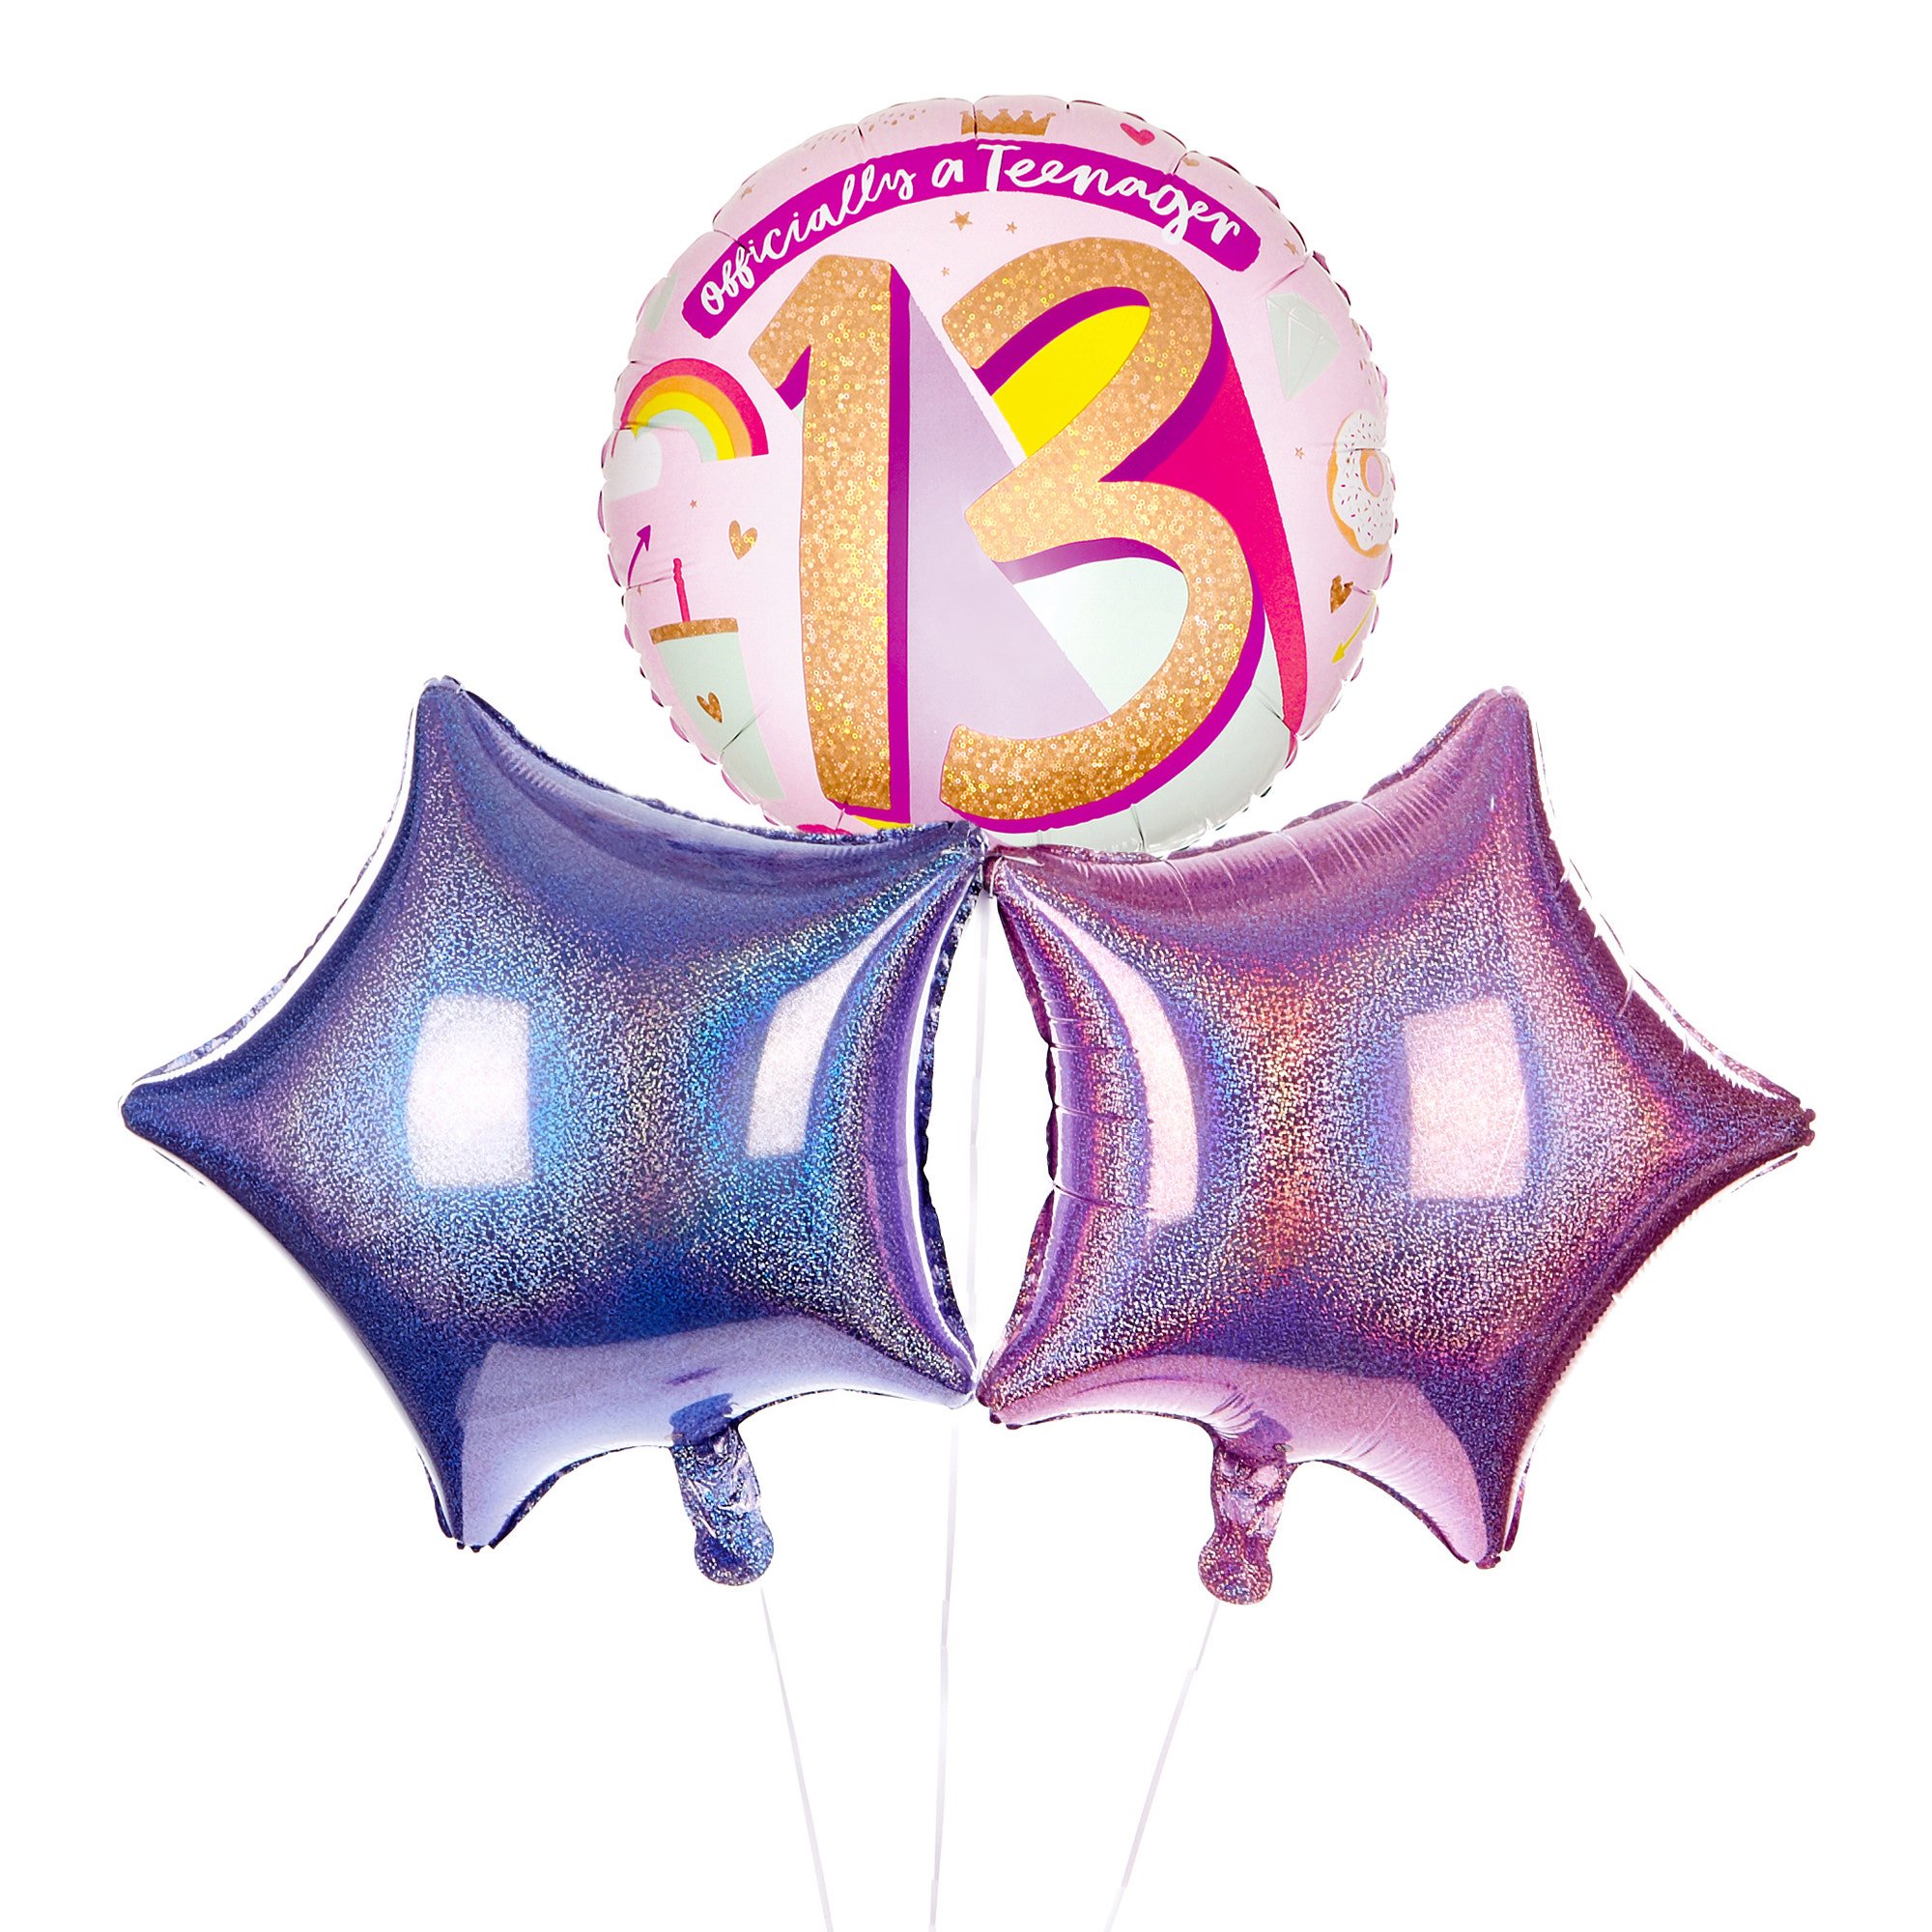 Pink Official Teenager 13th Birthday Balloon Bouquet - DELIVERED INFLATED!